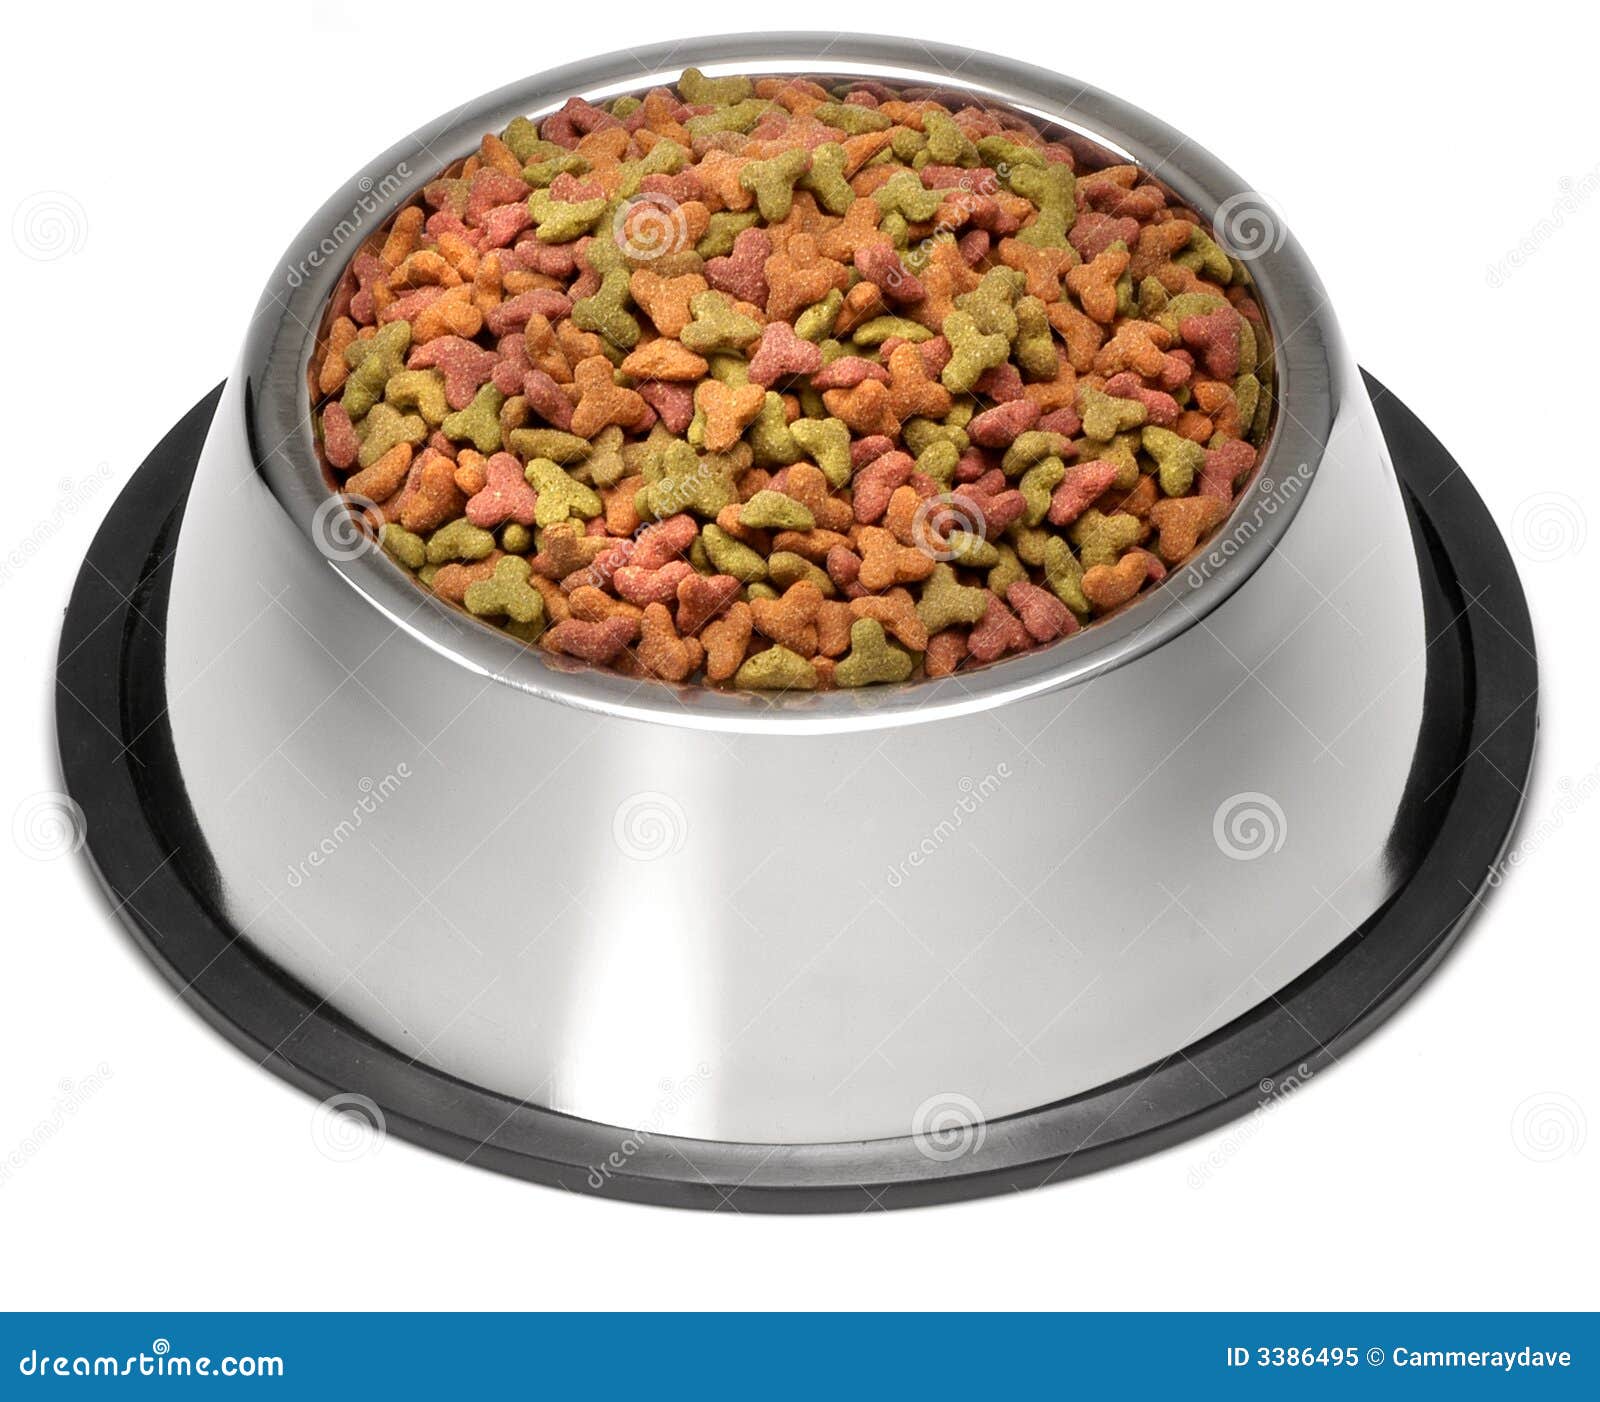 Get whole dog food review